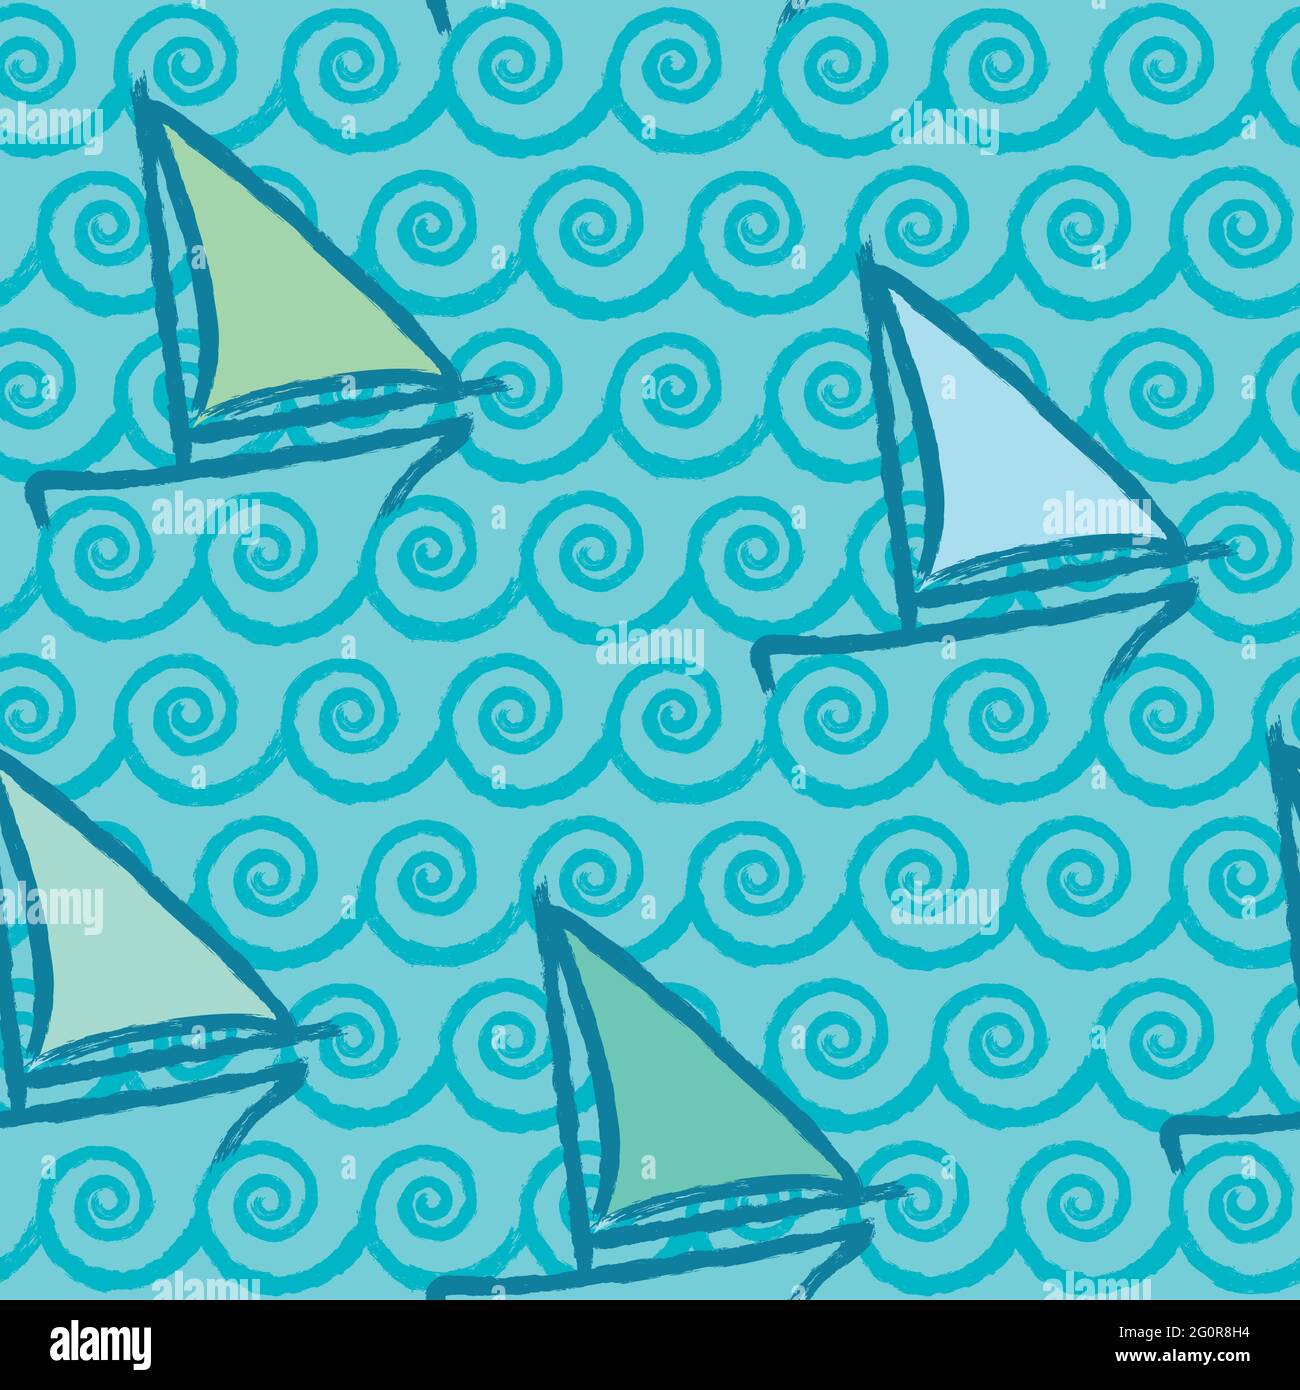 A seamless background of sailing boats sailing on blue waves. The drawings are made with grunge stroke. Stock Vector